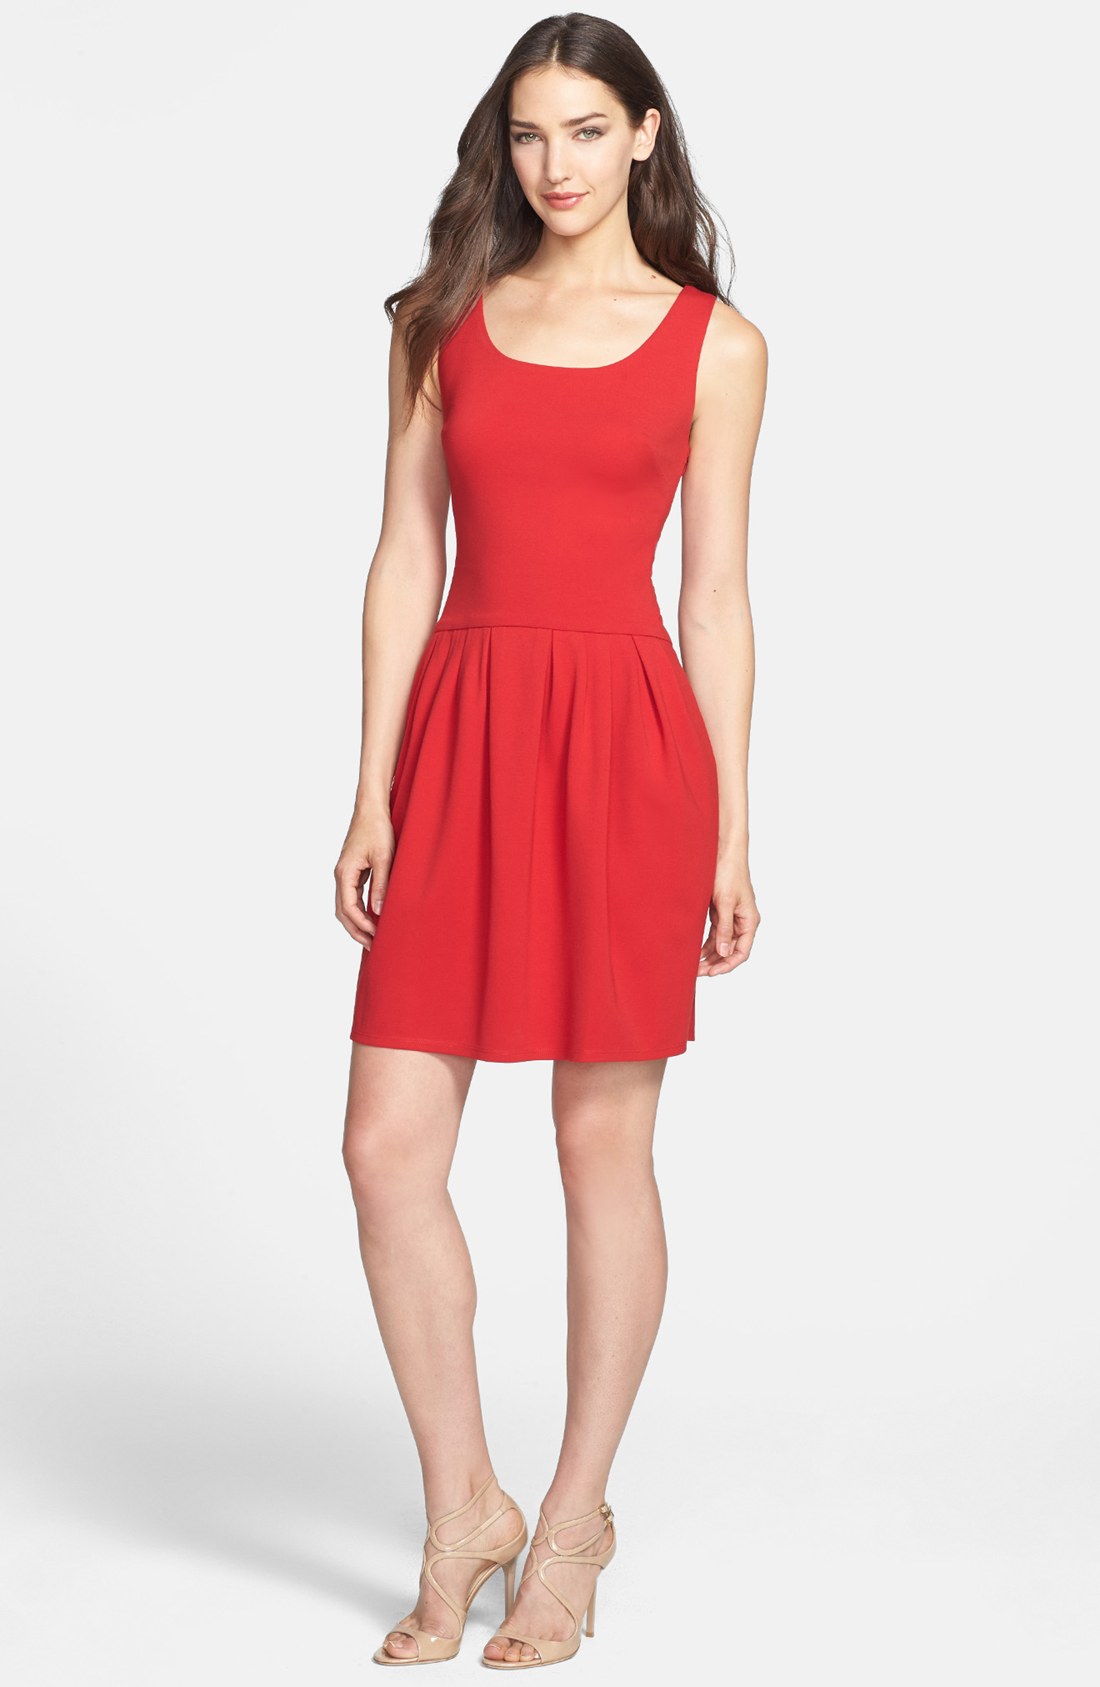 Betsey Johnson Bow Detail Ponte Fit Flare Dress in Red (Tomato) | Lyst